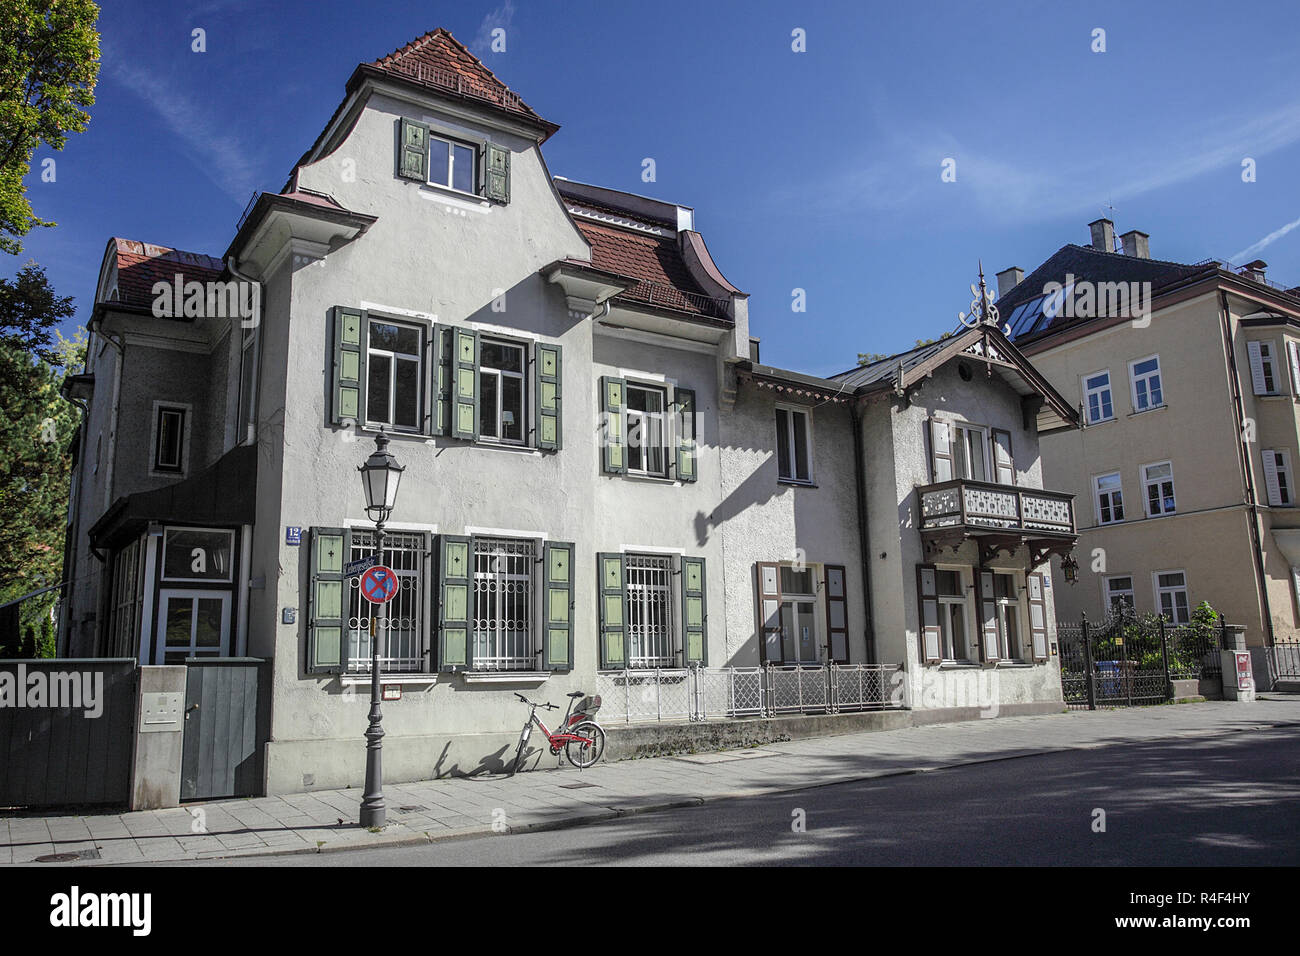 Viewed not far from the English Garden in Munich is this classic German architecture in the form of residential homes. Stock Photo